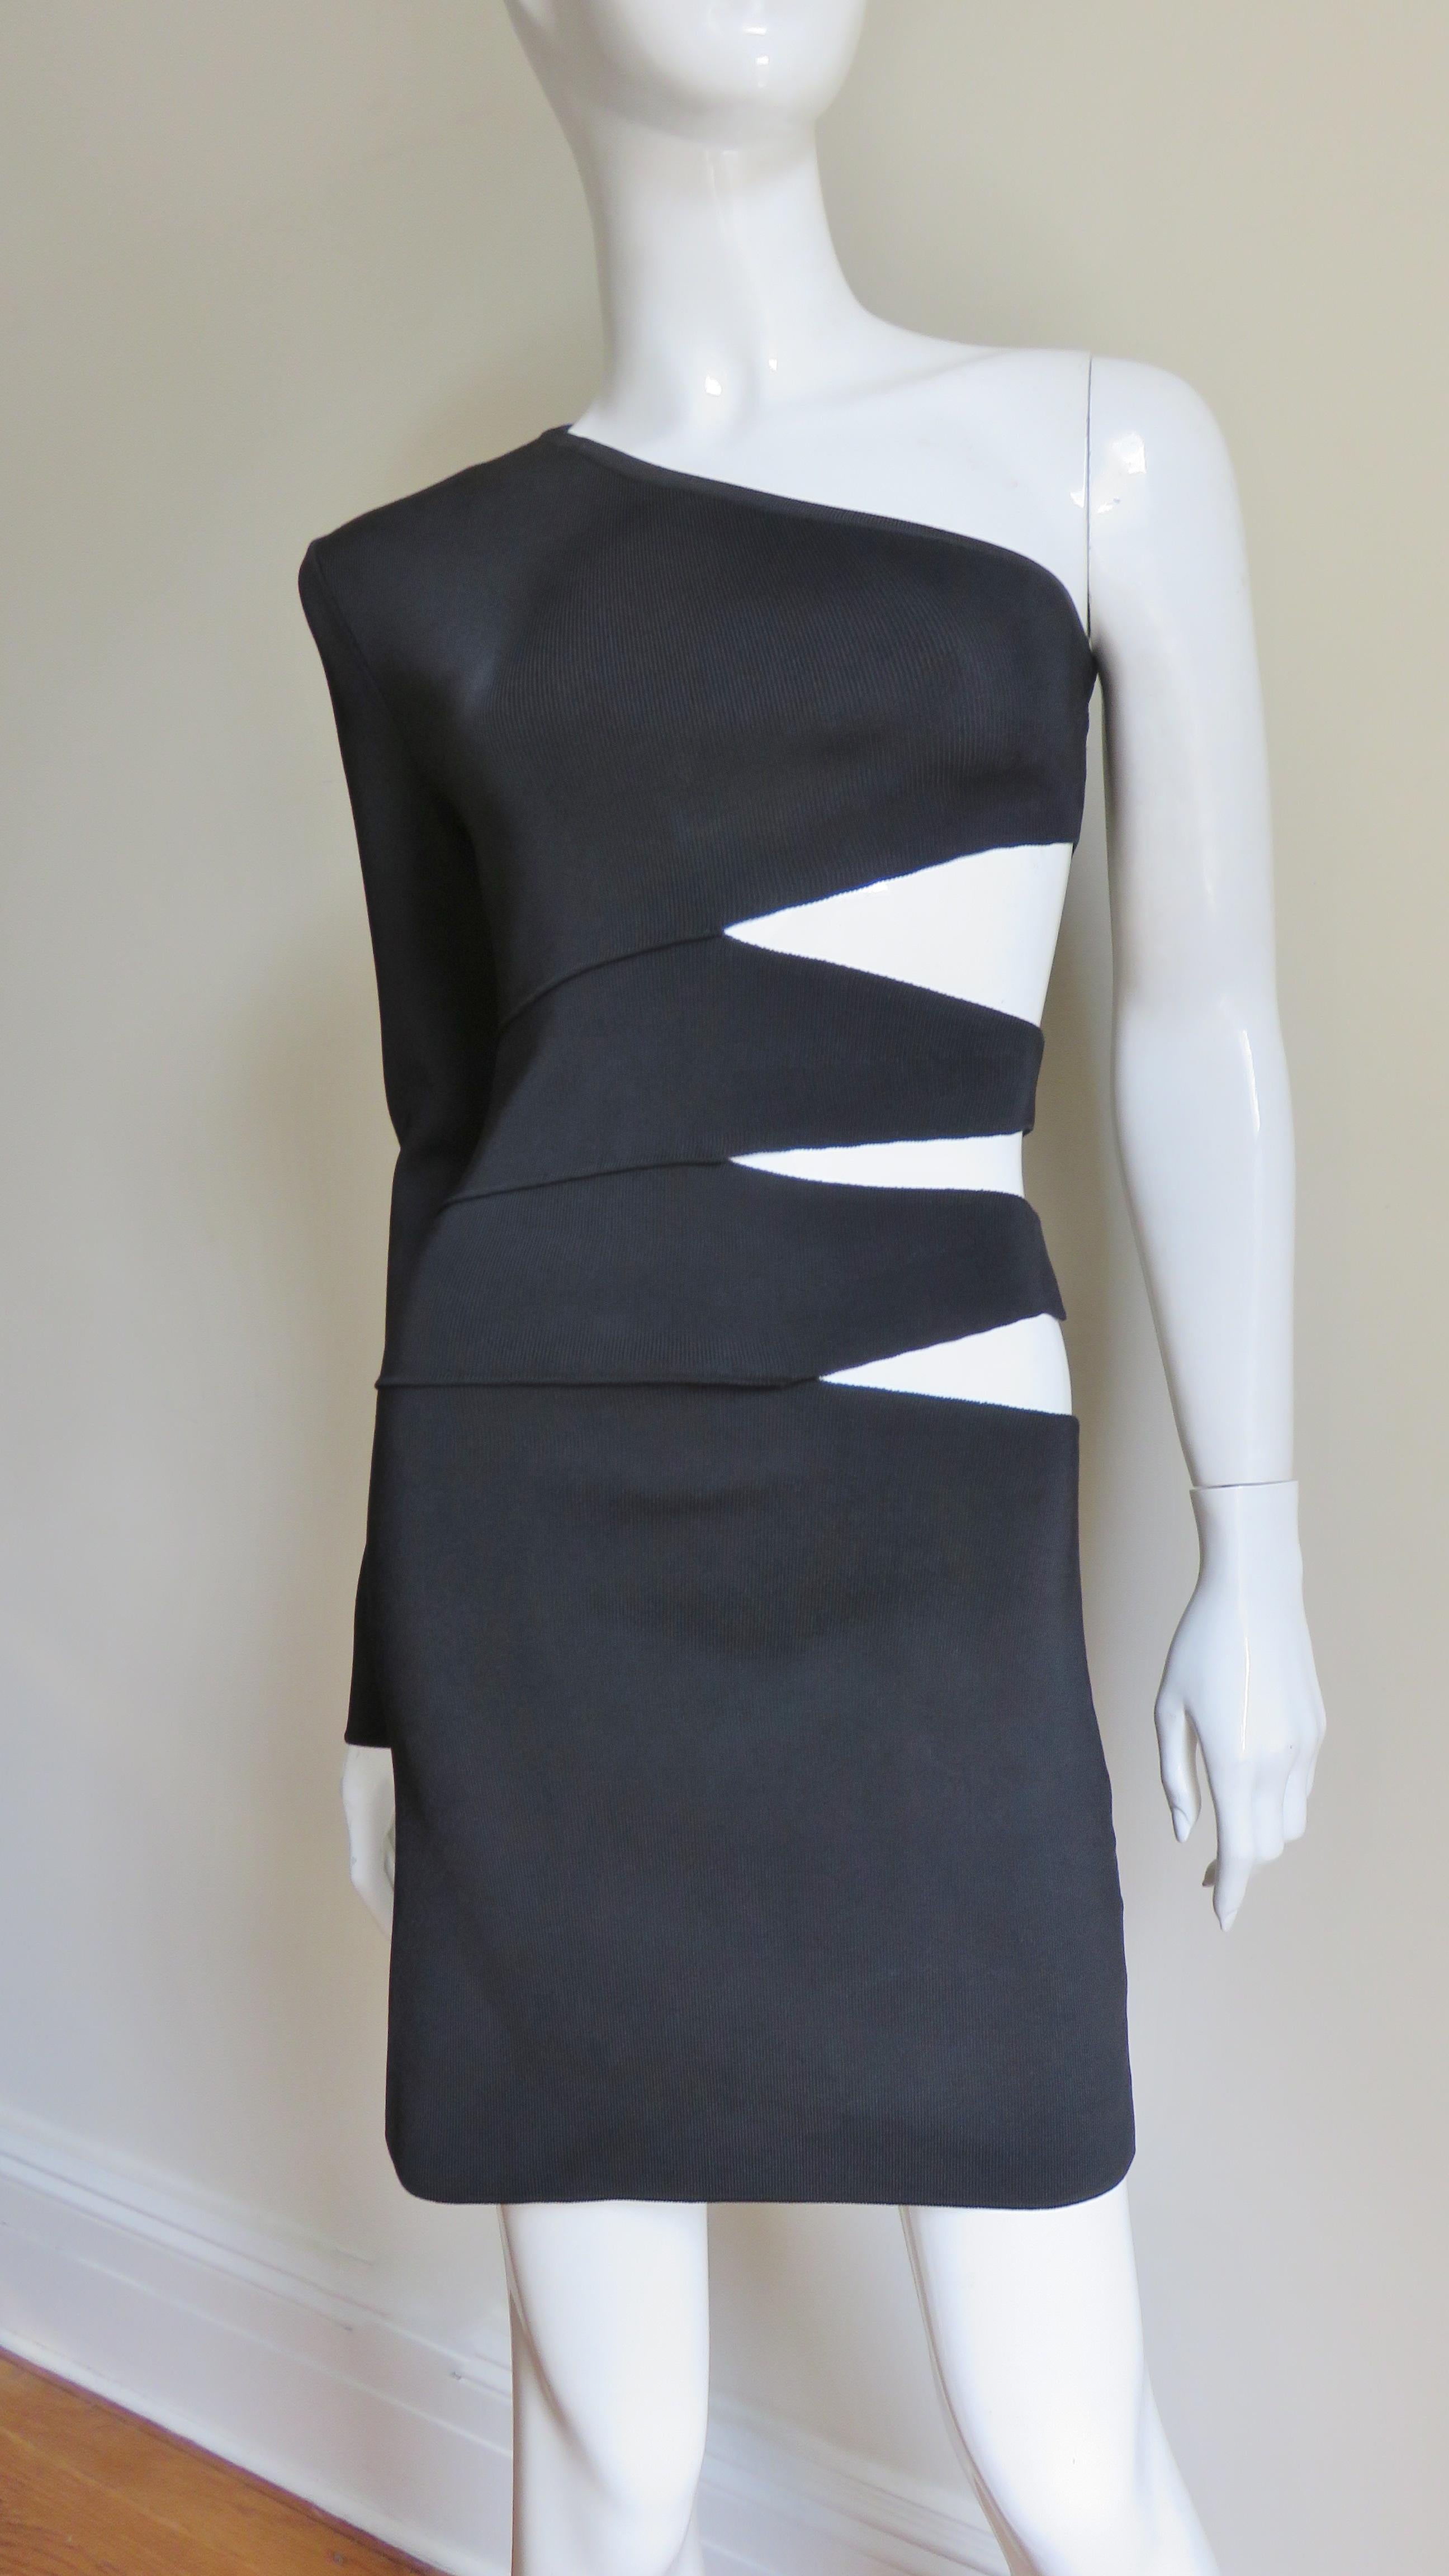 A fabulous black bodycon bandage dress from Pierre Balmain.  It has one sleeve and a series of diamond shaped cut outs from under the bust  to the hips on one side. The skirt is straight and the dress goes on over the head.
Appears unworn.  Fits